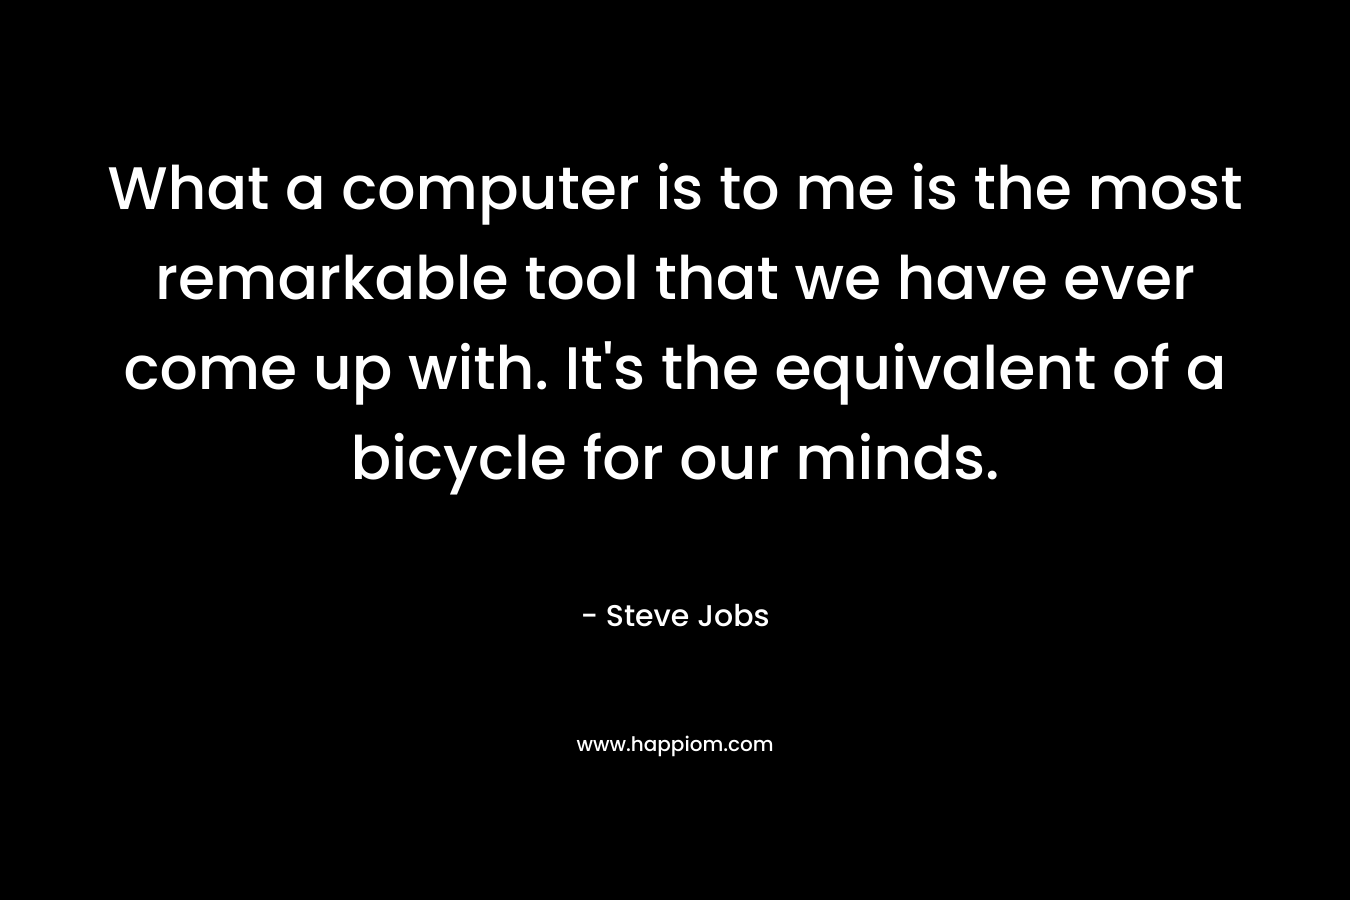 What a computer is to me is the most remarkable tool that we have ever come up with. It’s the equivalent of a bicycle for our minds. – Steve Jobs